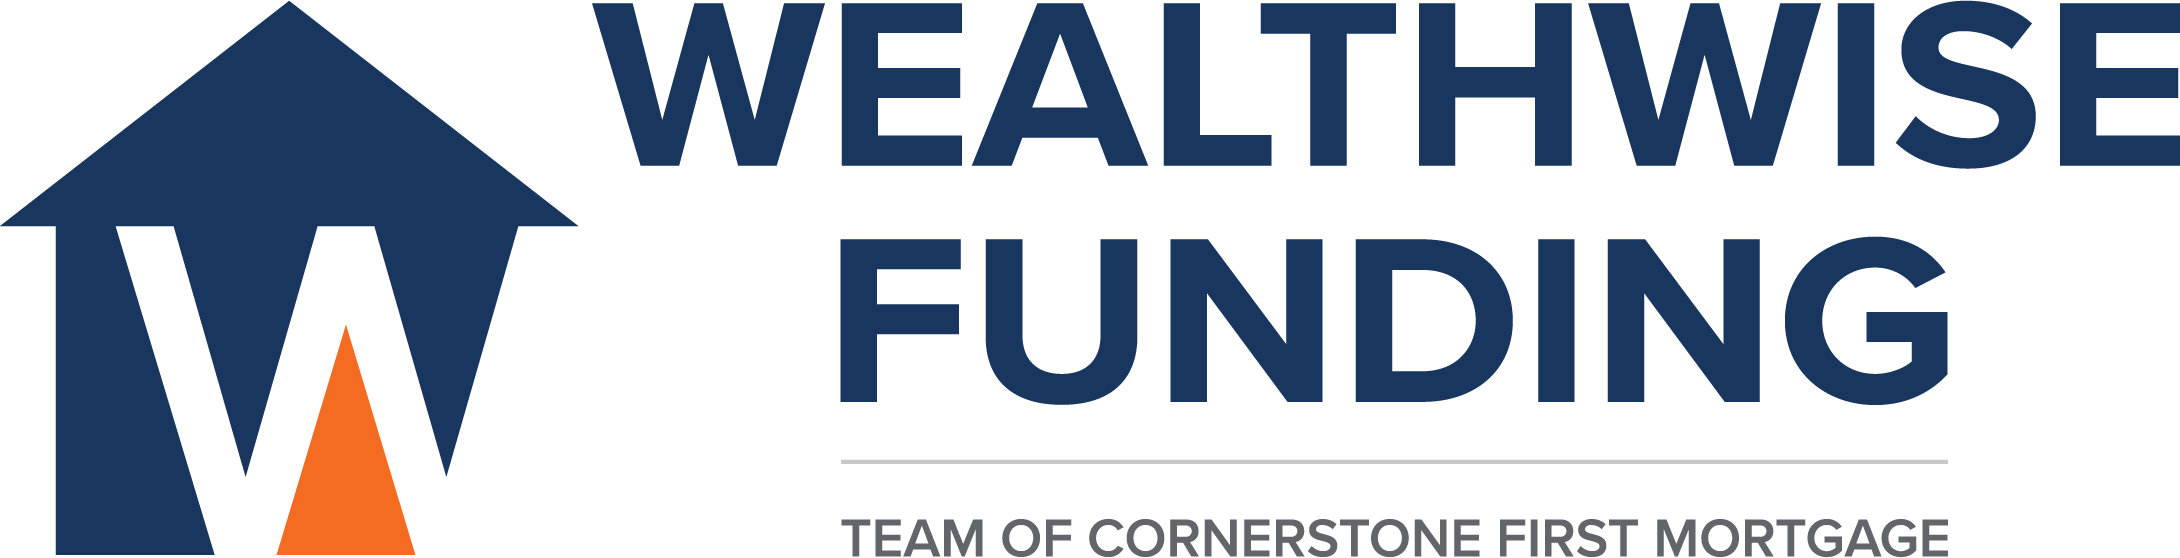 WealthWise Funding, A Team Of Cornerstone First Mortgage